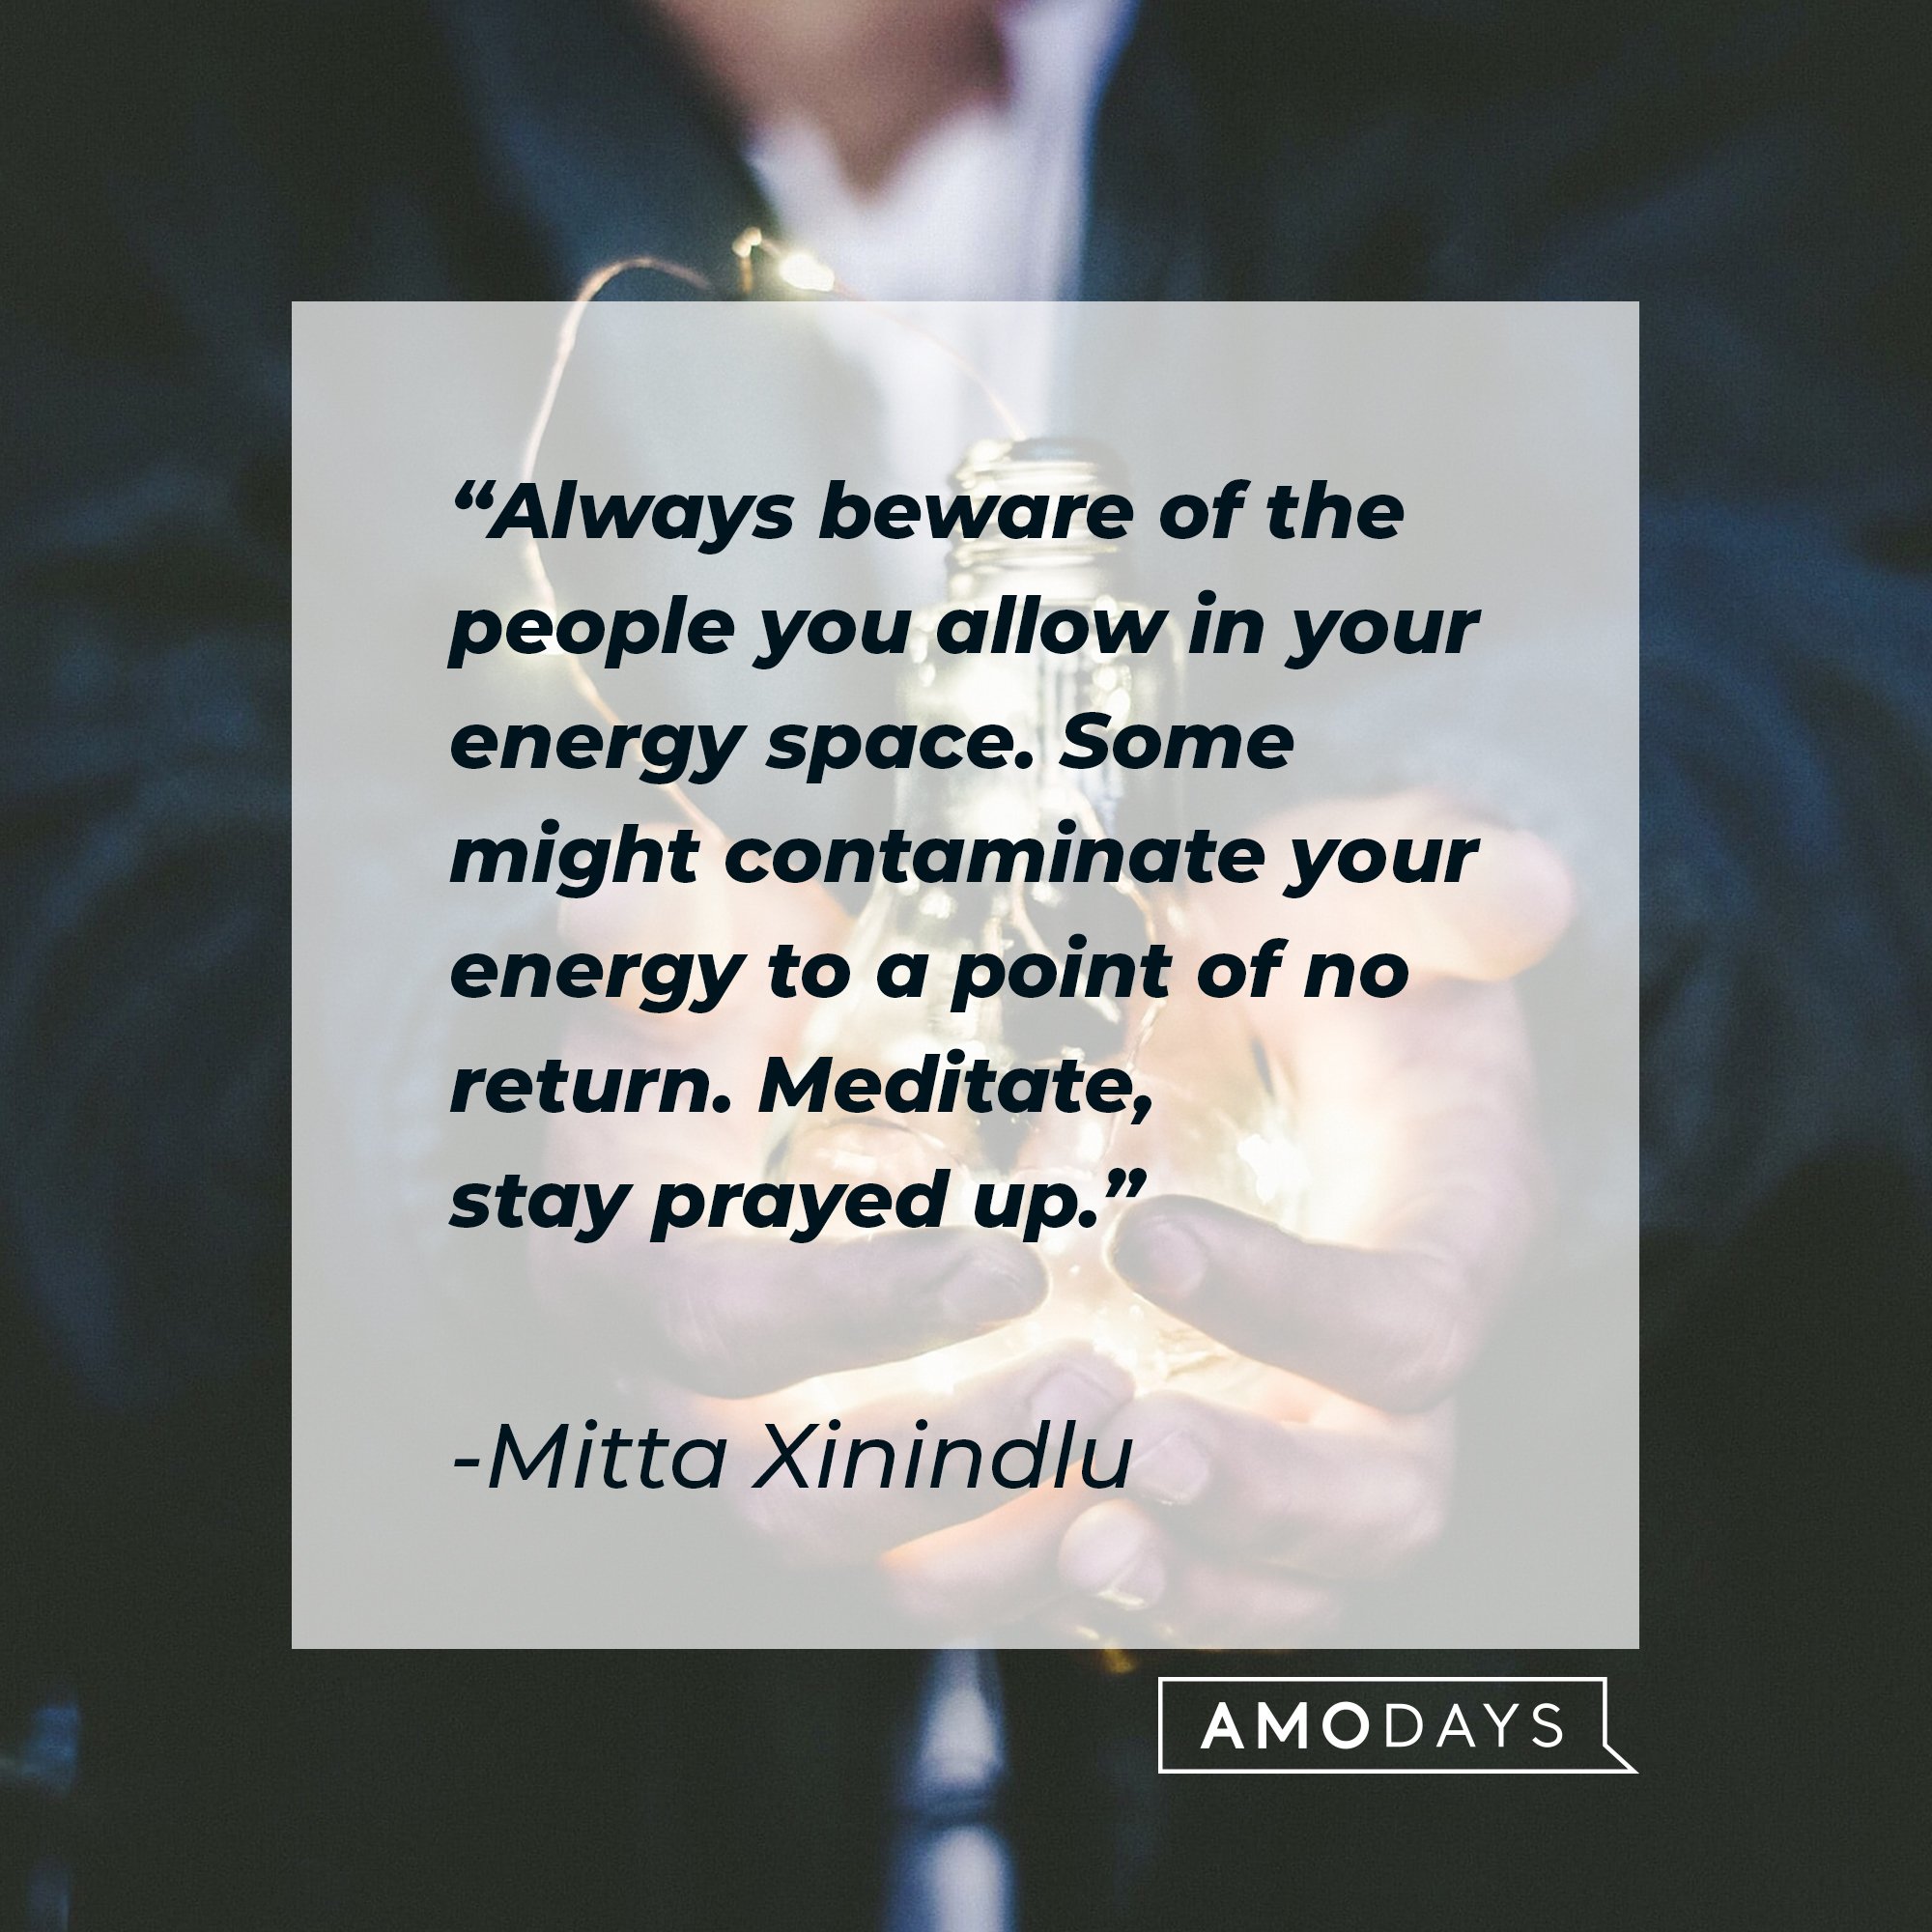 Mitta Xinindlu's quote: "Always beware of the people you allow in your energy space. Some might contaminate your energy to a point of no return. Meditate, stay prayed up."  | Image: AmoDays